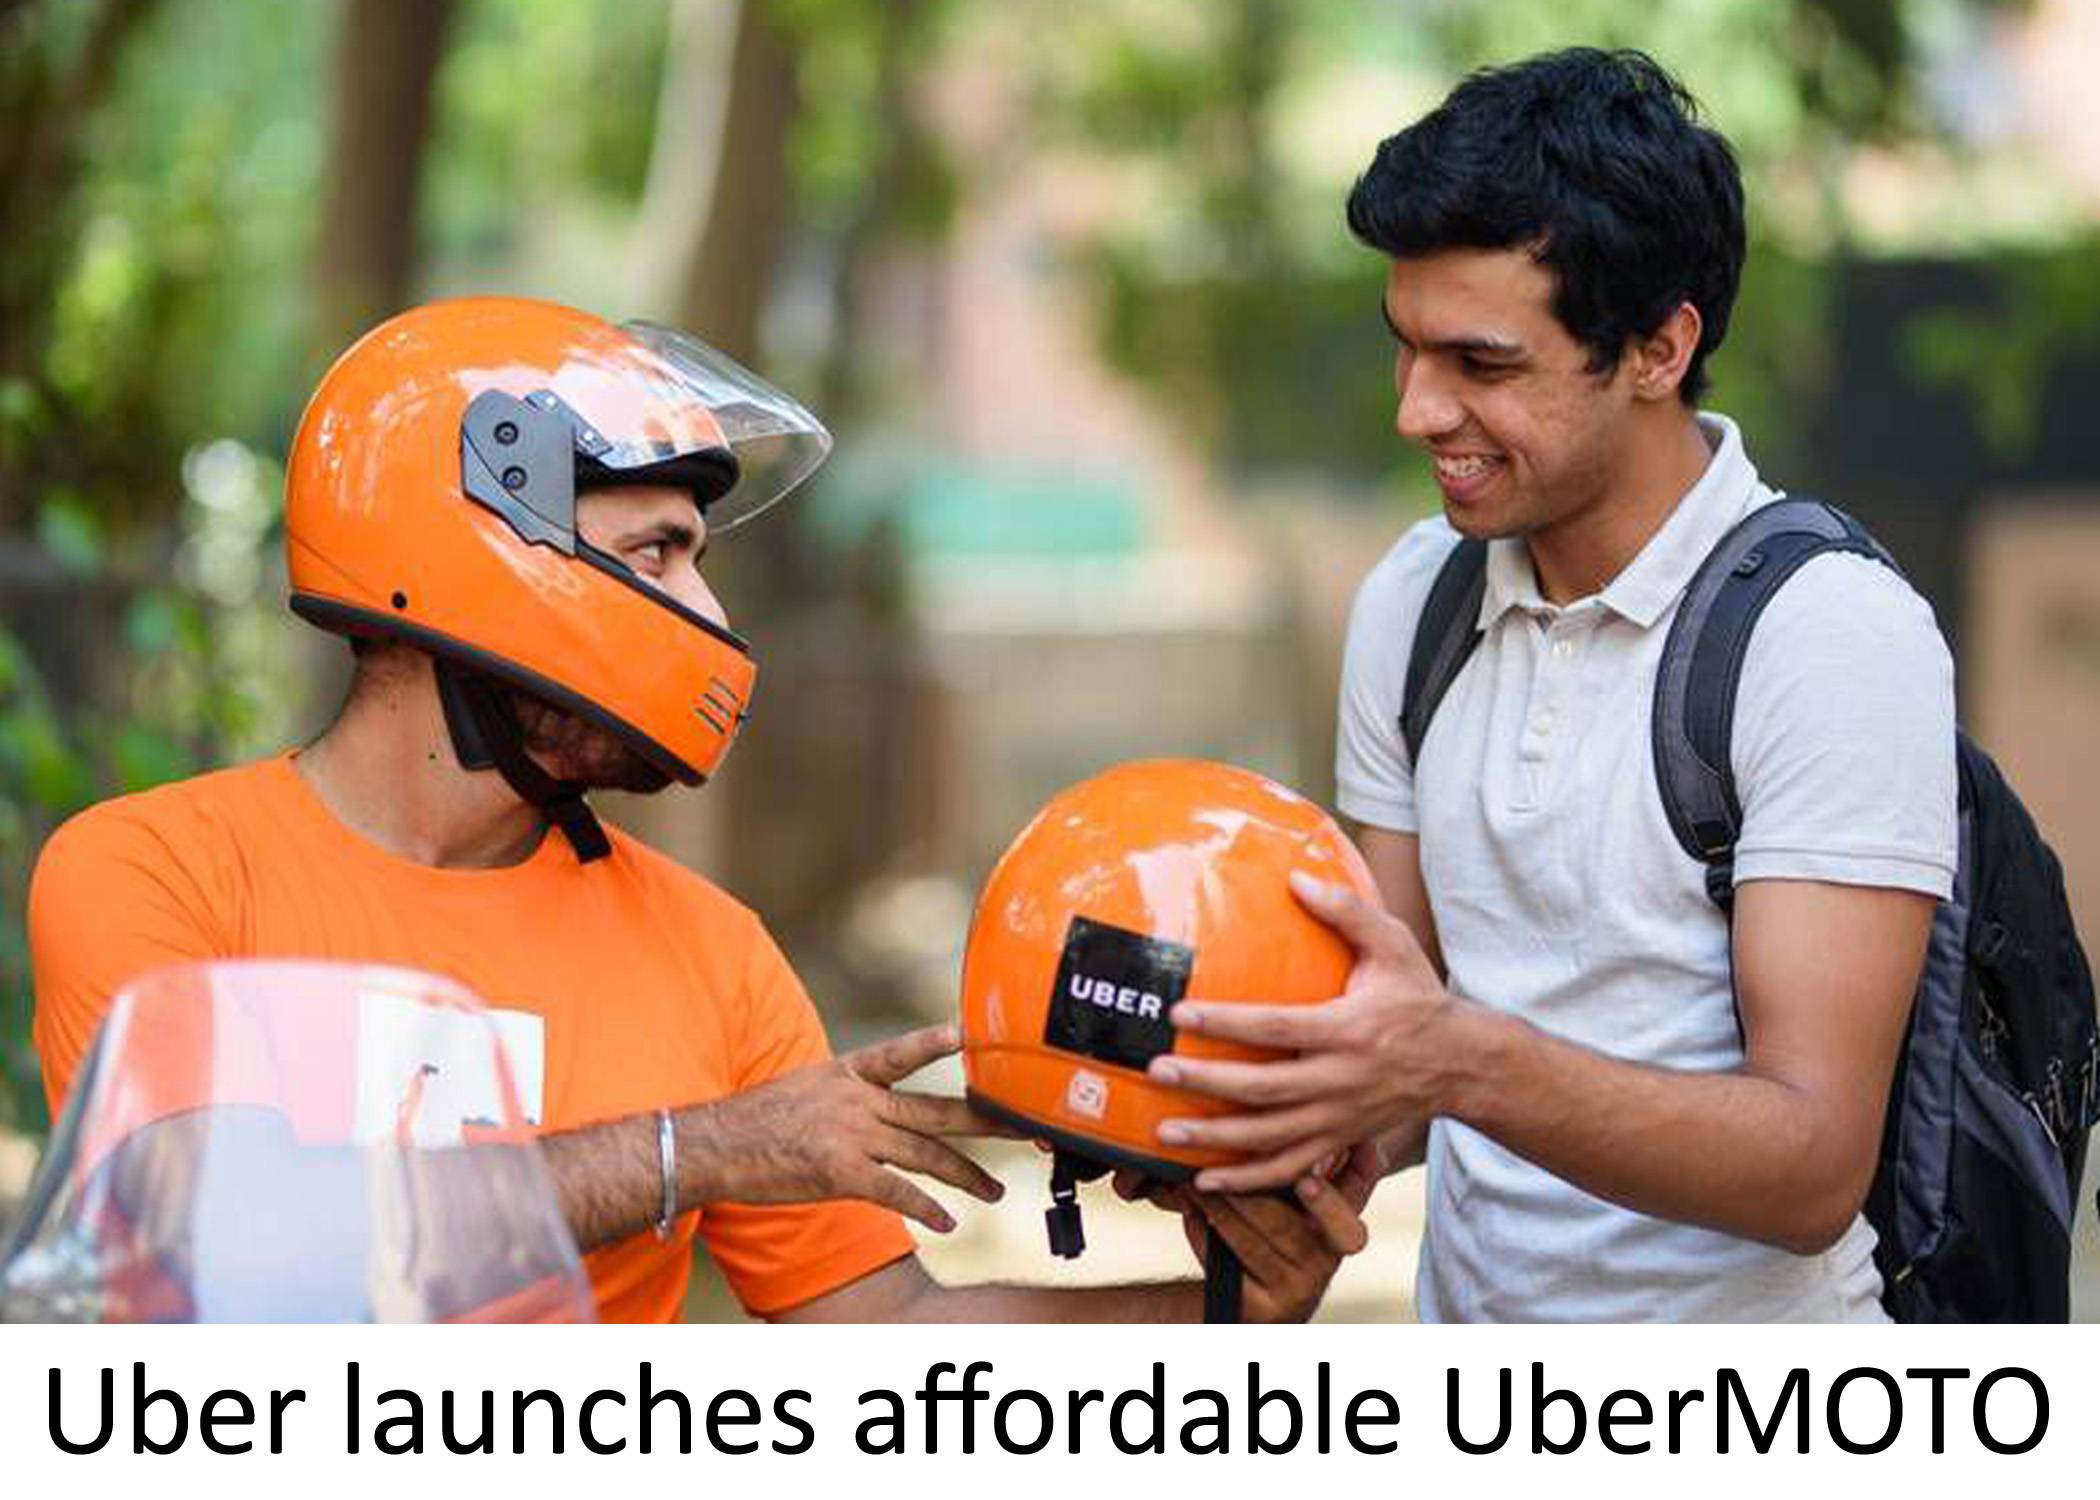 Uber launches the affordable uber MOTO